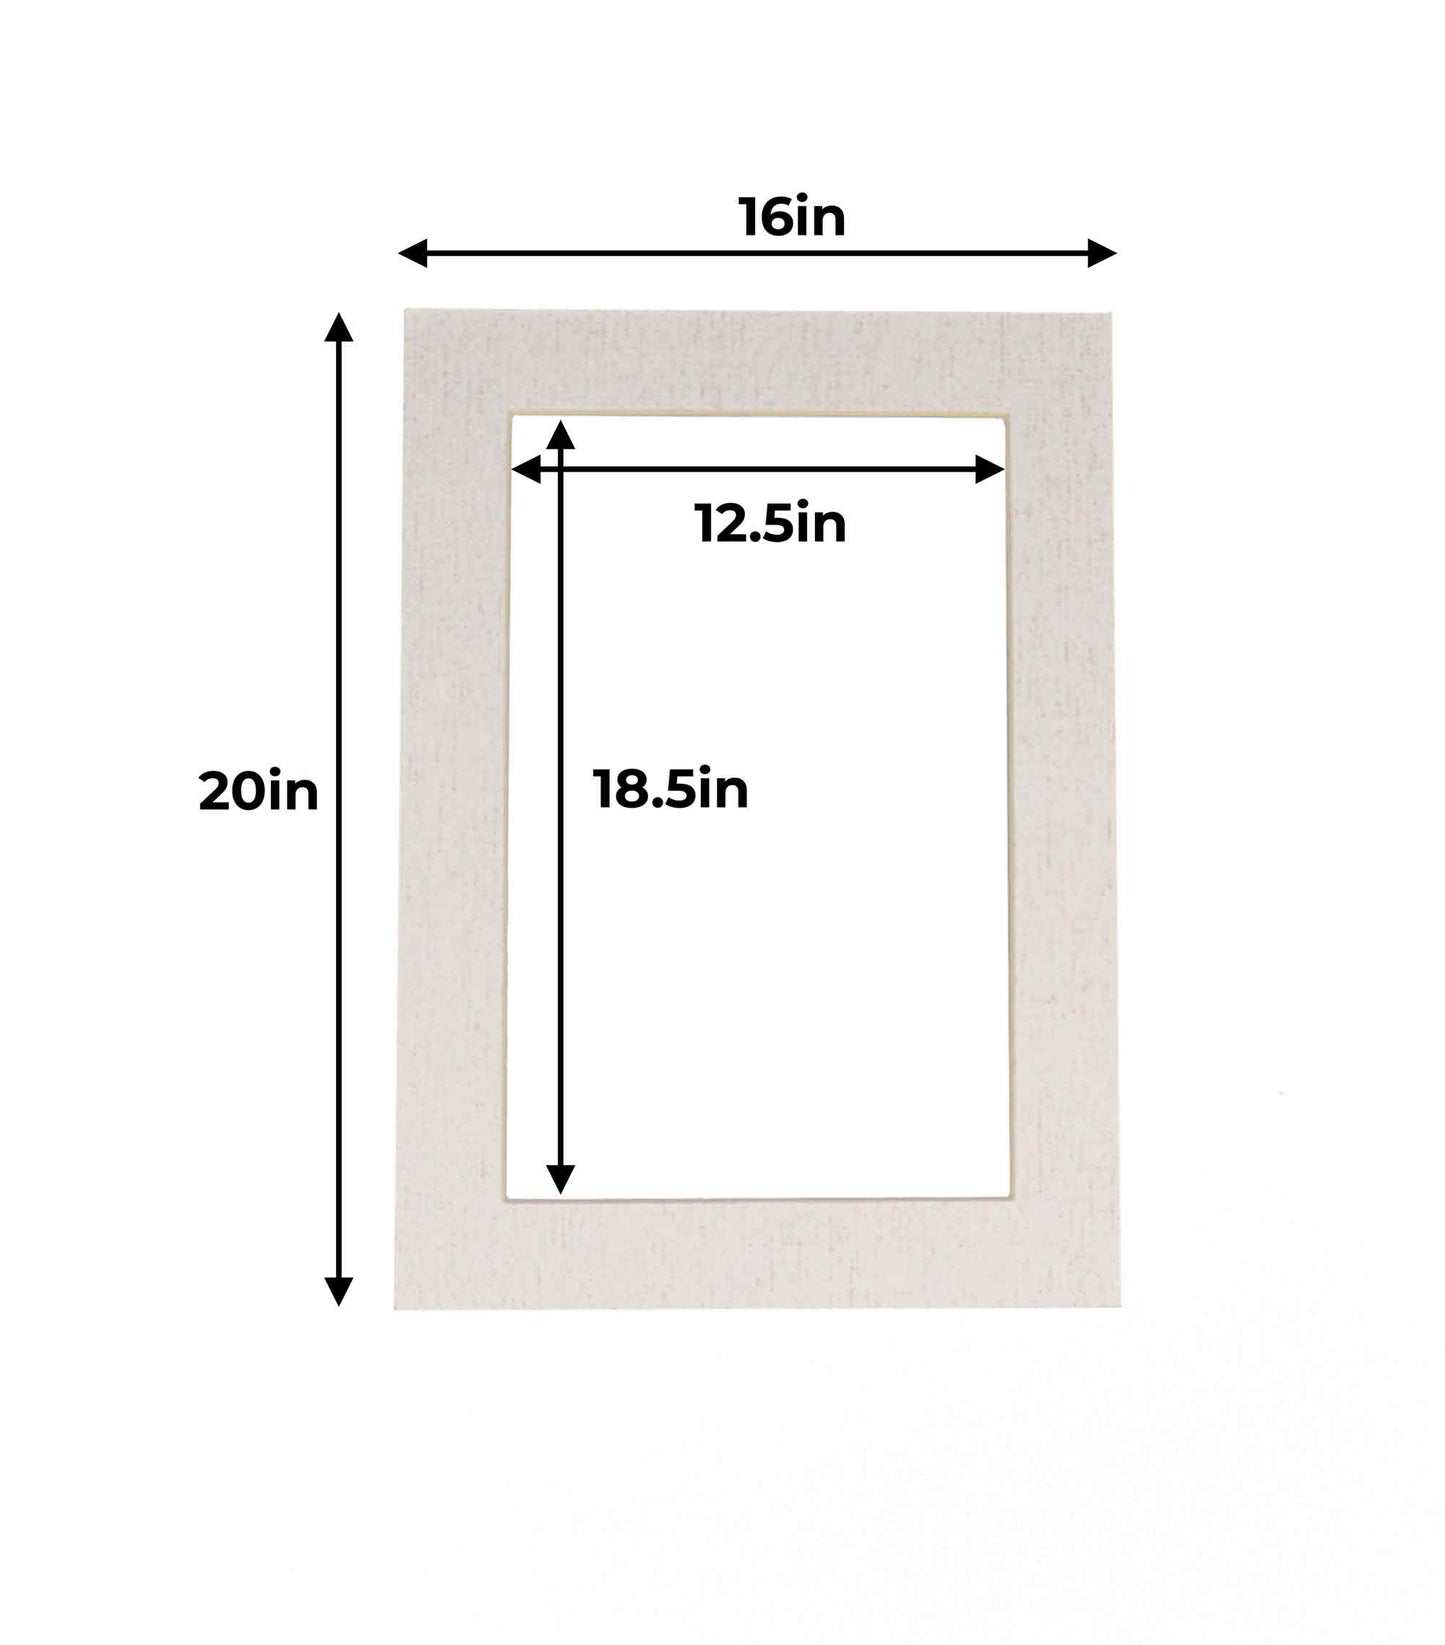 White Linen Canvas Precut Acid-Free Matboard Set with Clear Bag & Backing